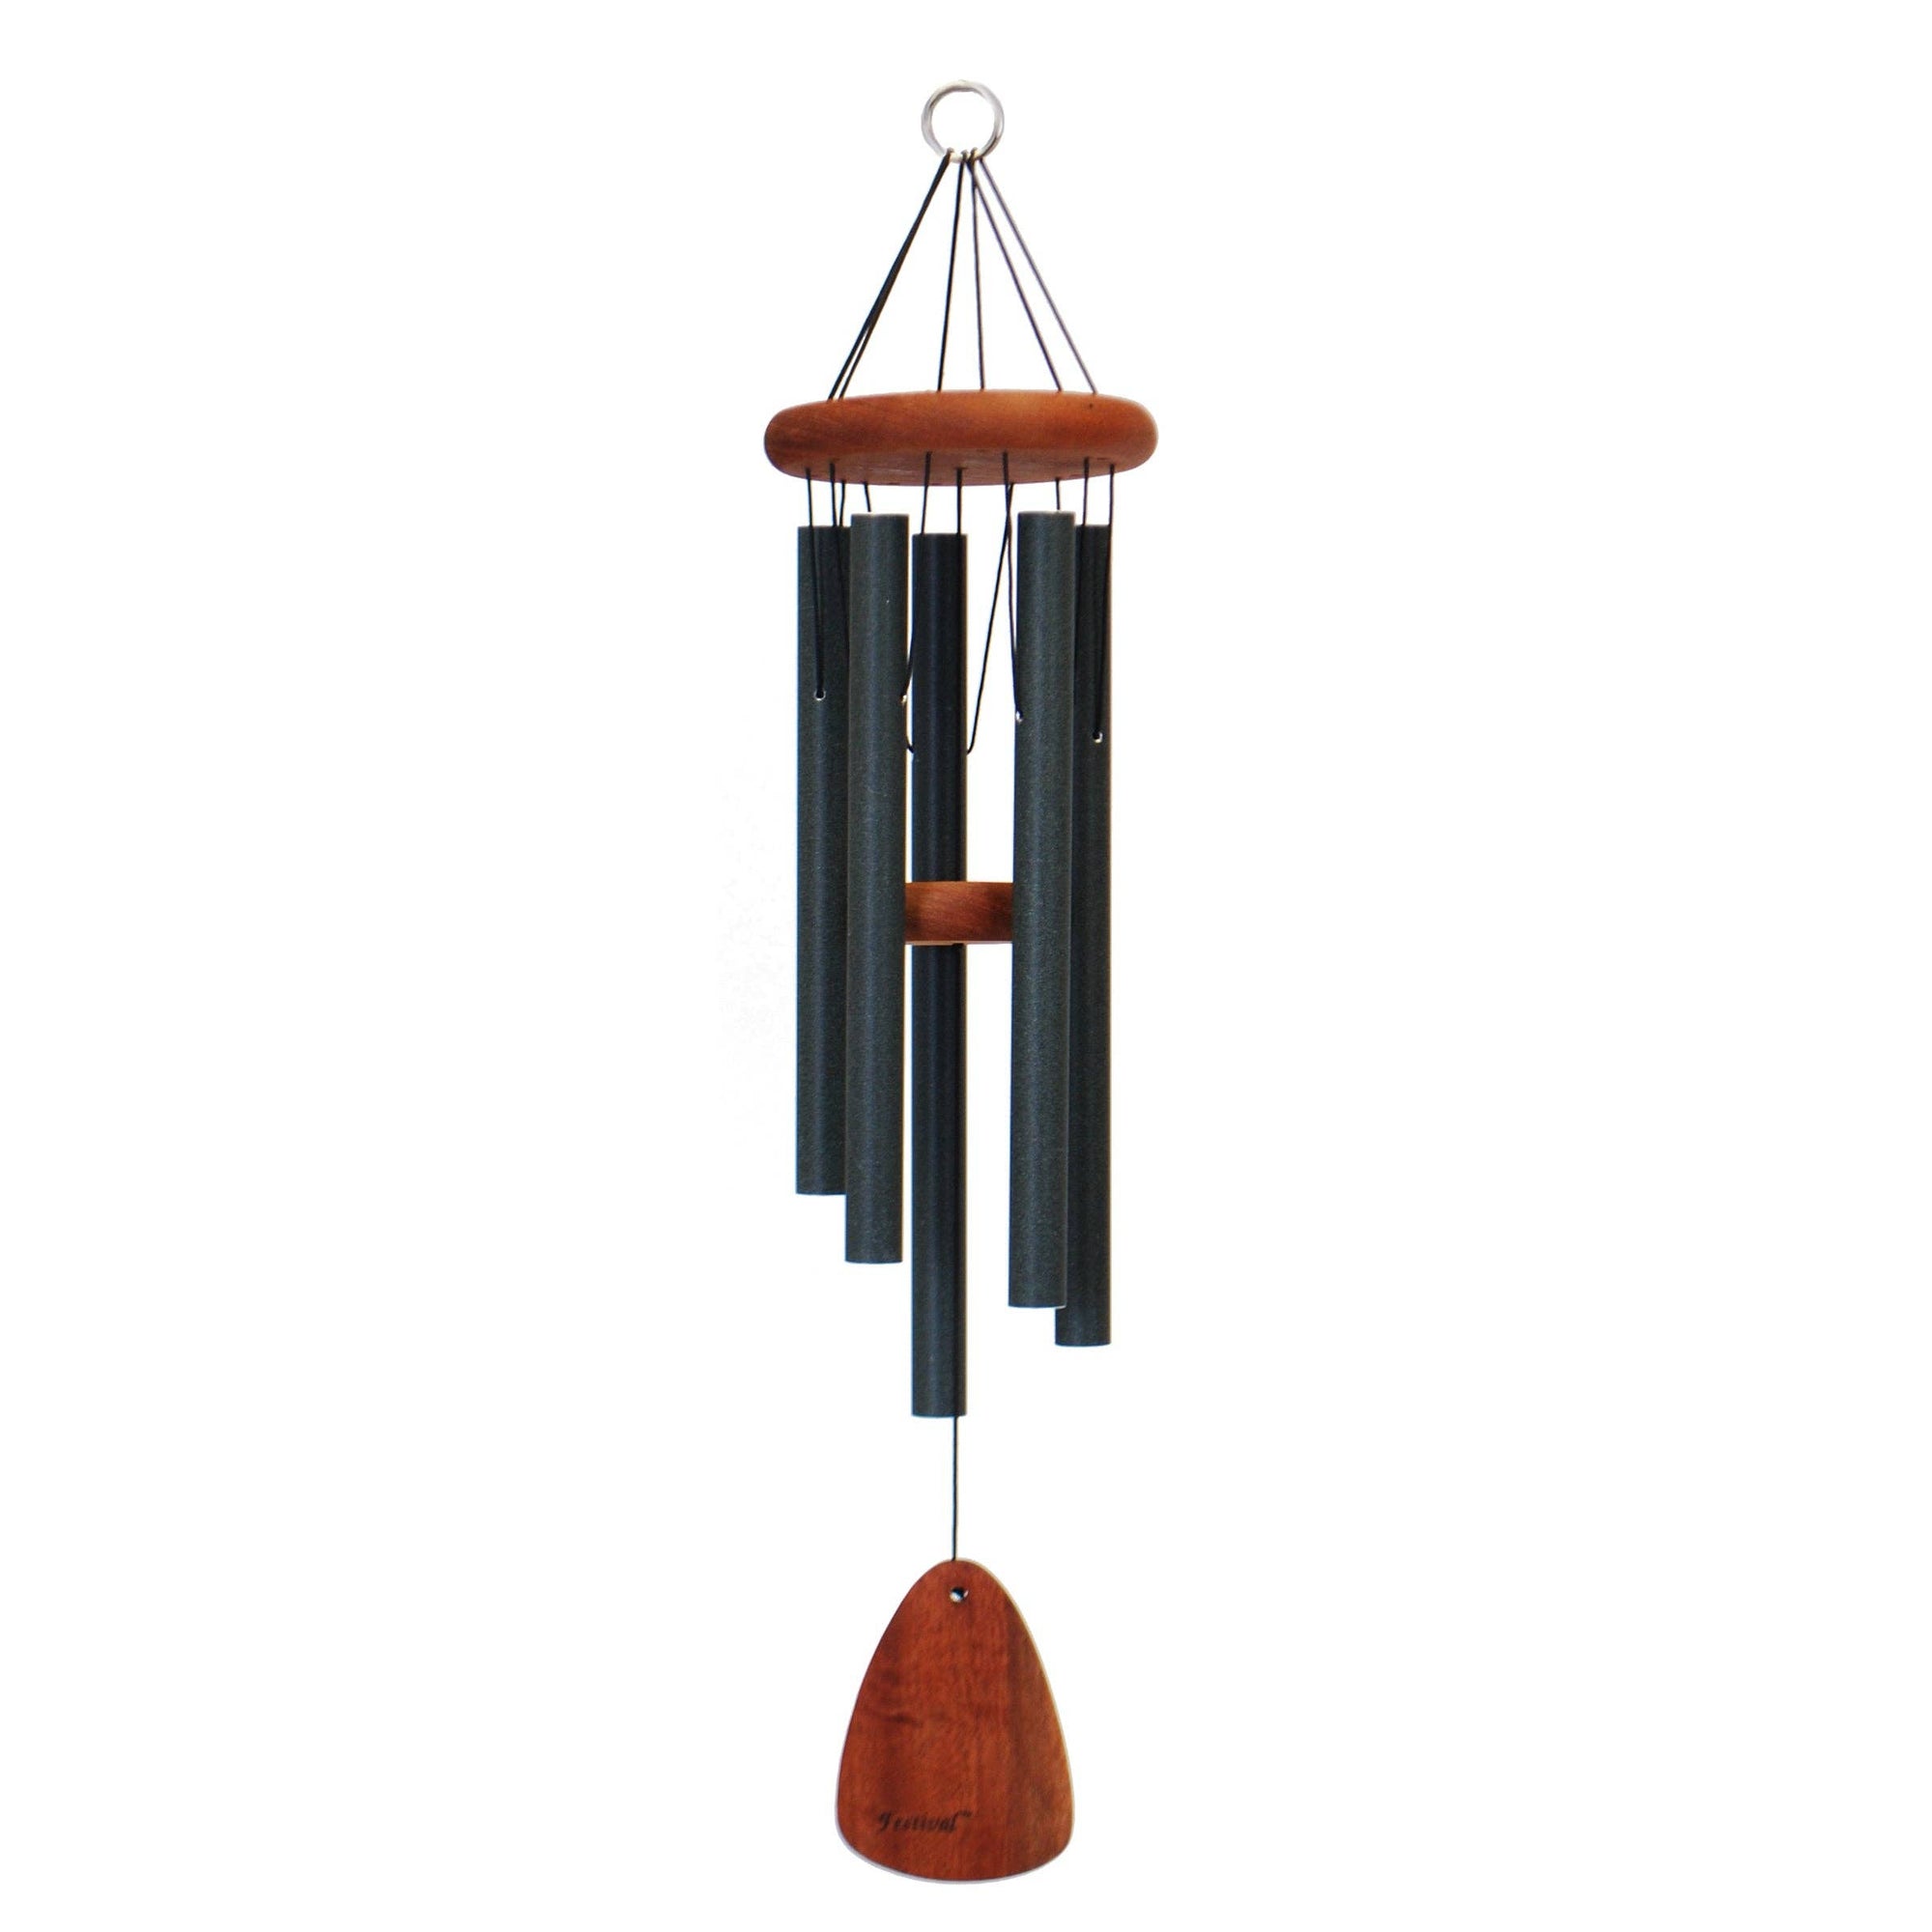 An affordable Festival® 28-inch Windchime with a wood and metal tube.